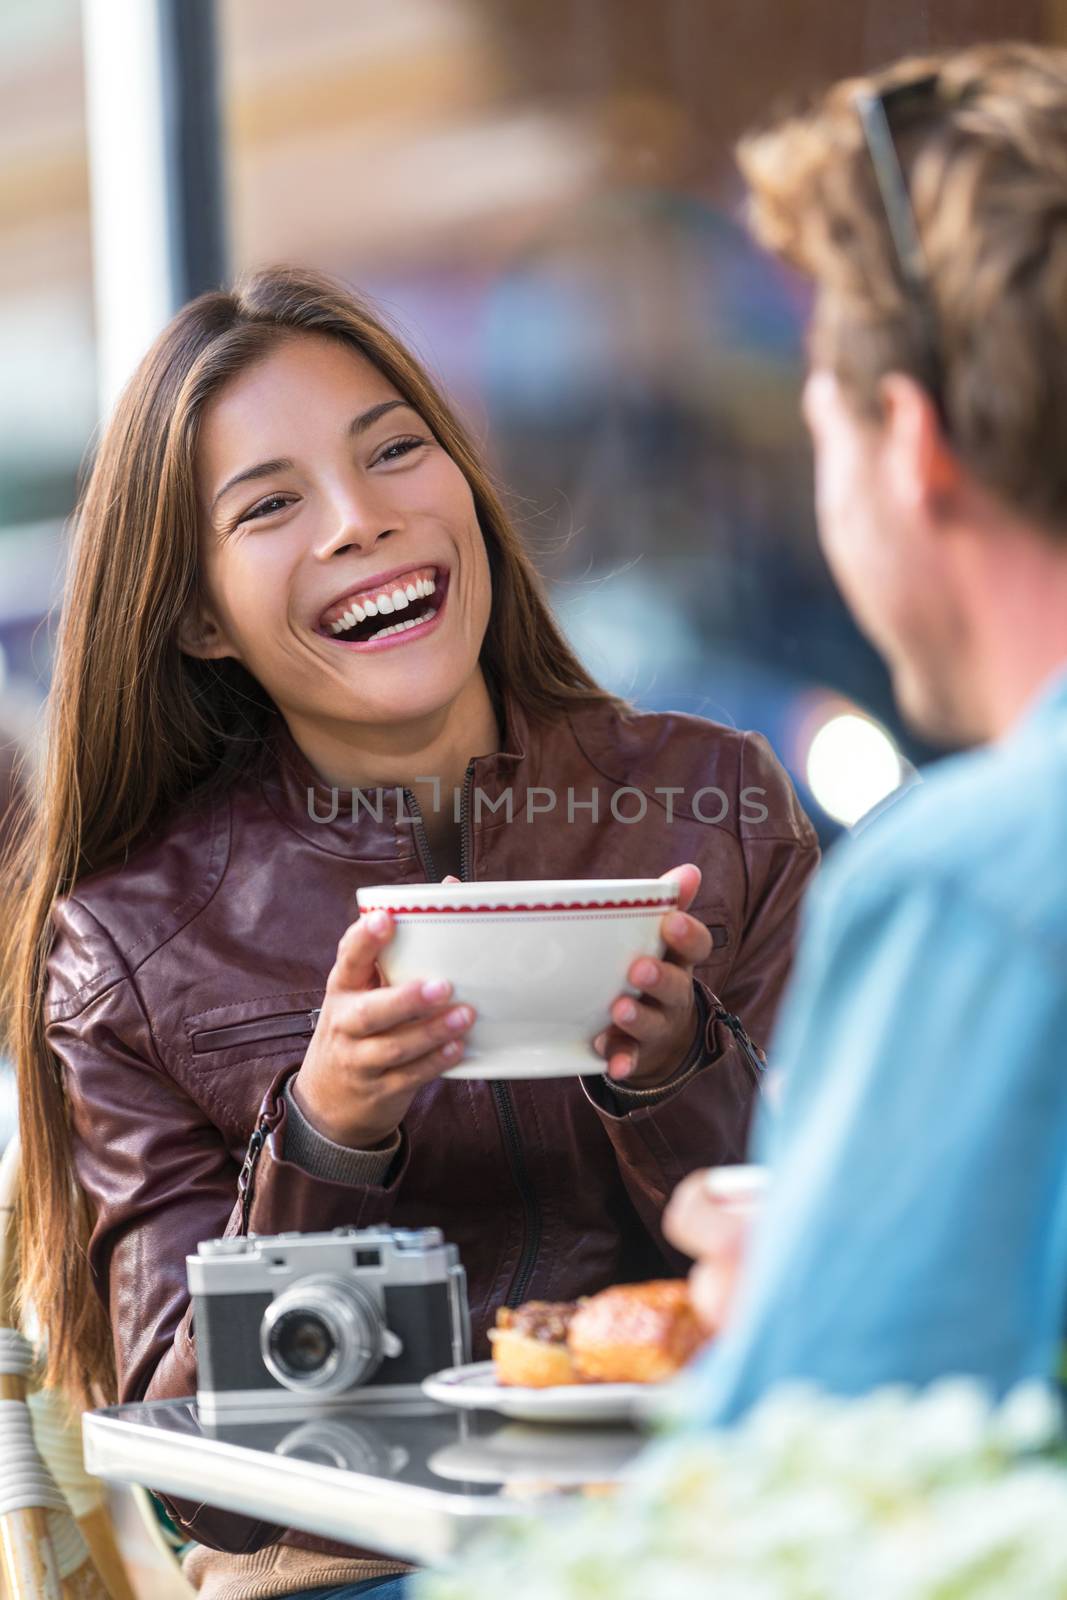 Happy woman drinking coffee at cafe. Asian girl, conversation with man friend laughing sitting at restaurant table having fun. Urban city couple lifestyle.